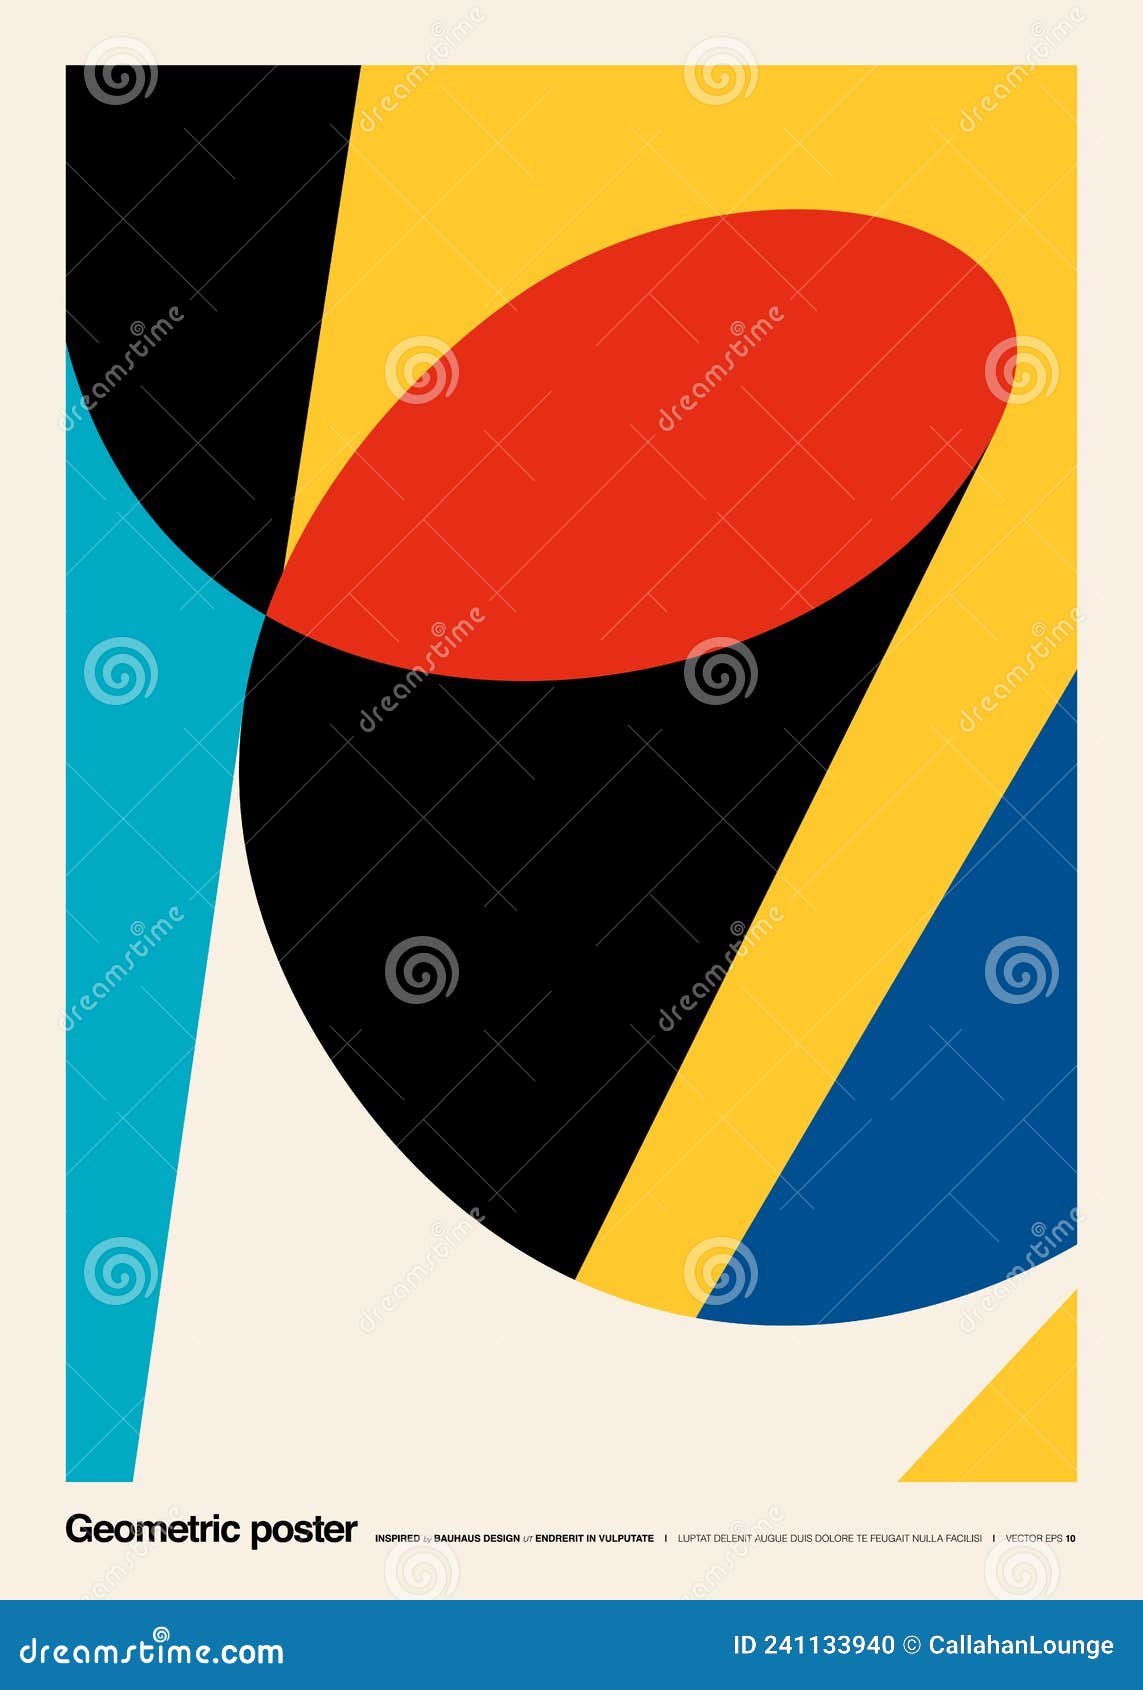 original poster made in the bauhaus style